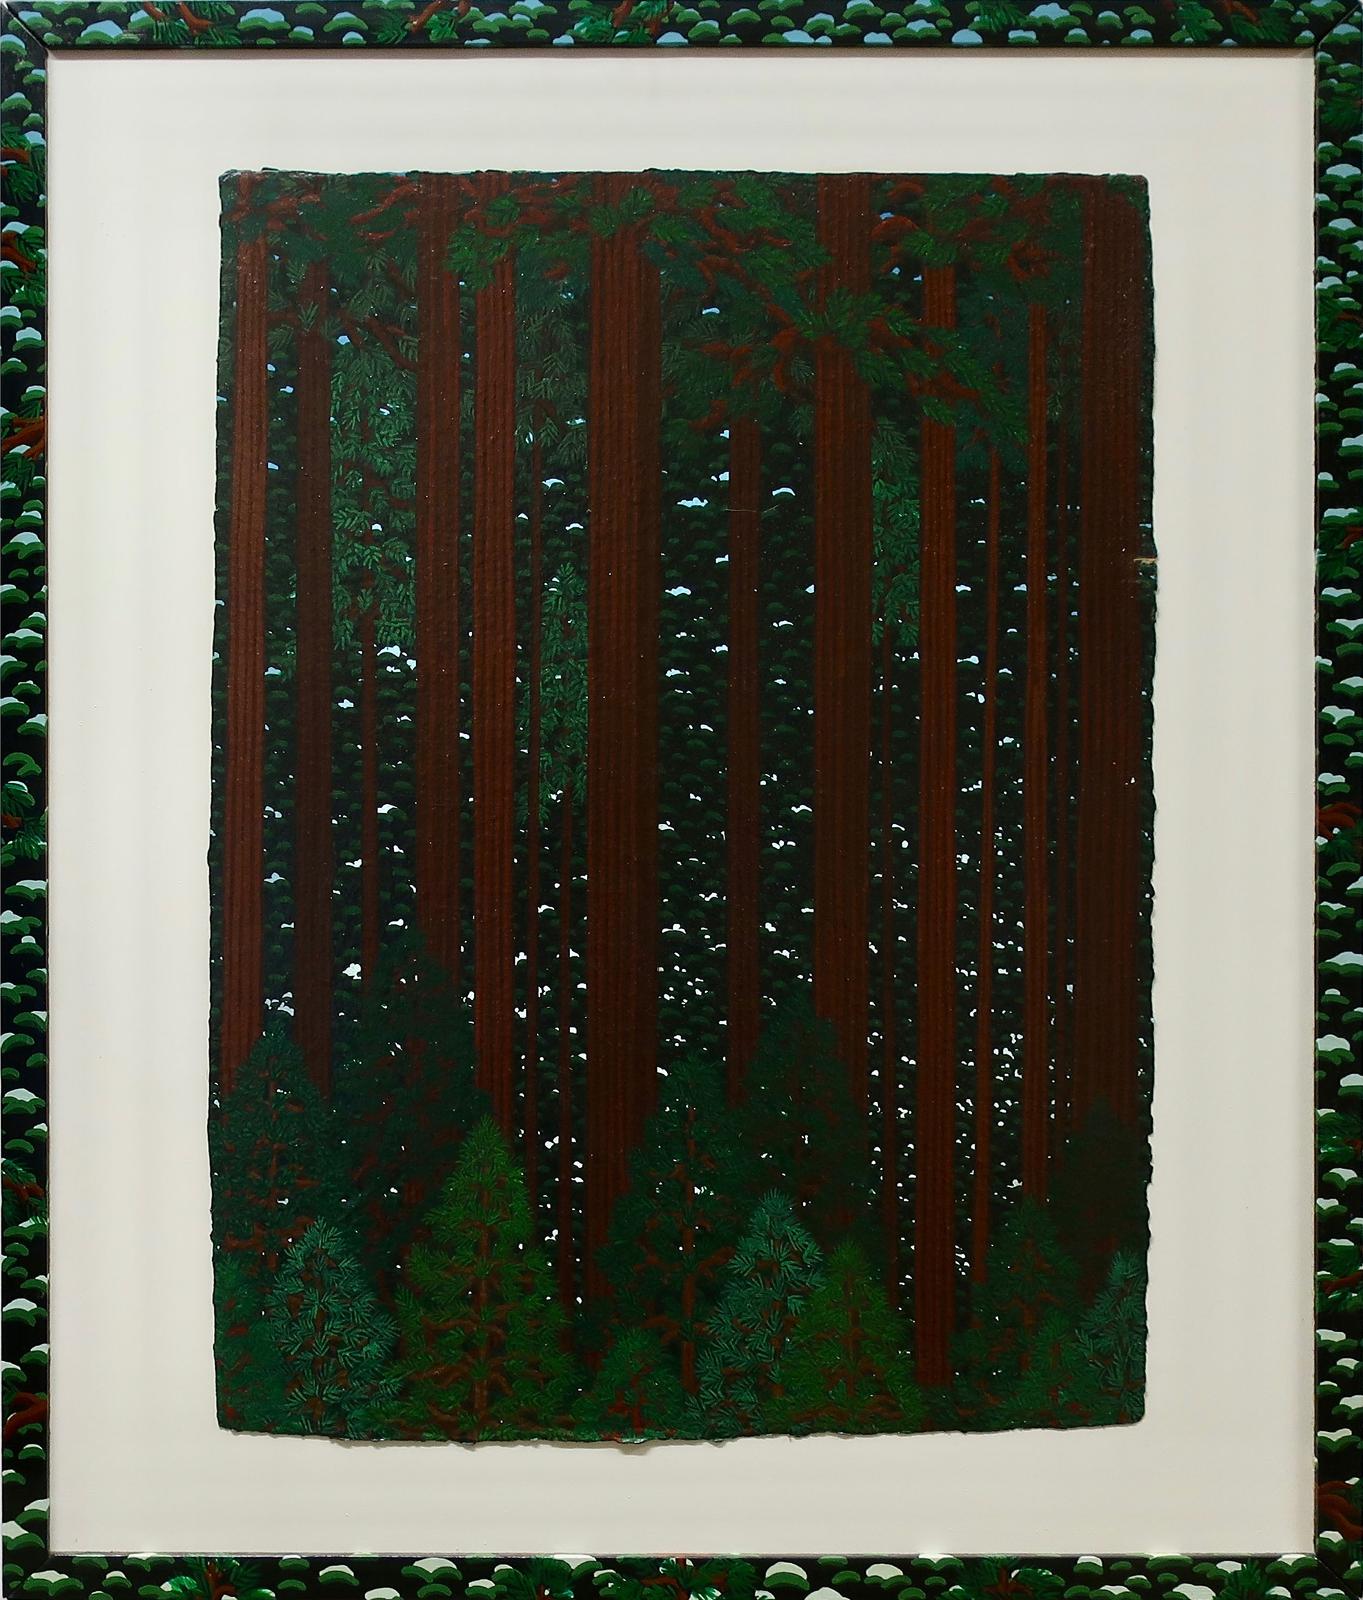 Jerry Richard Didur (1951) - Can't See The Forest